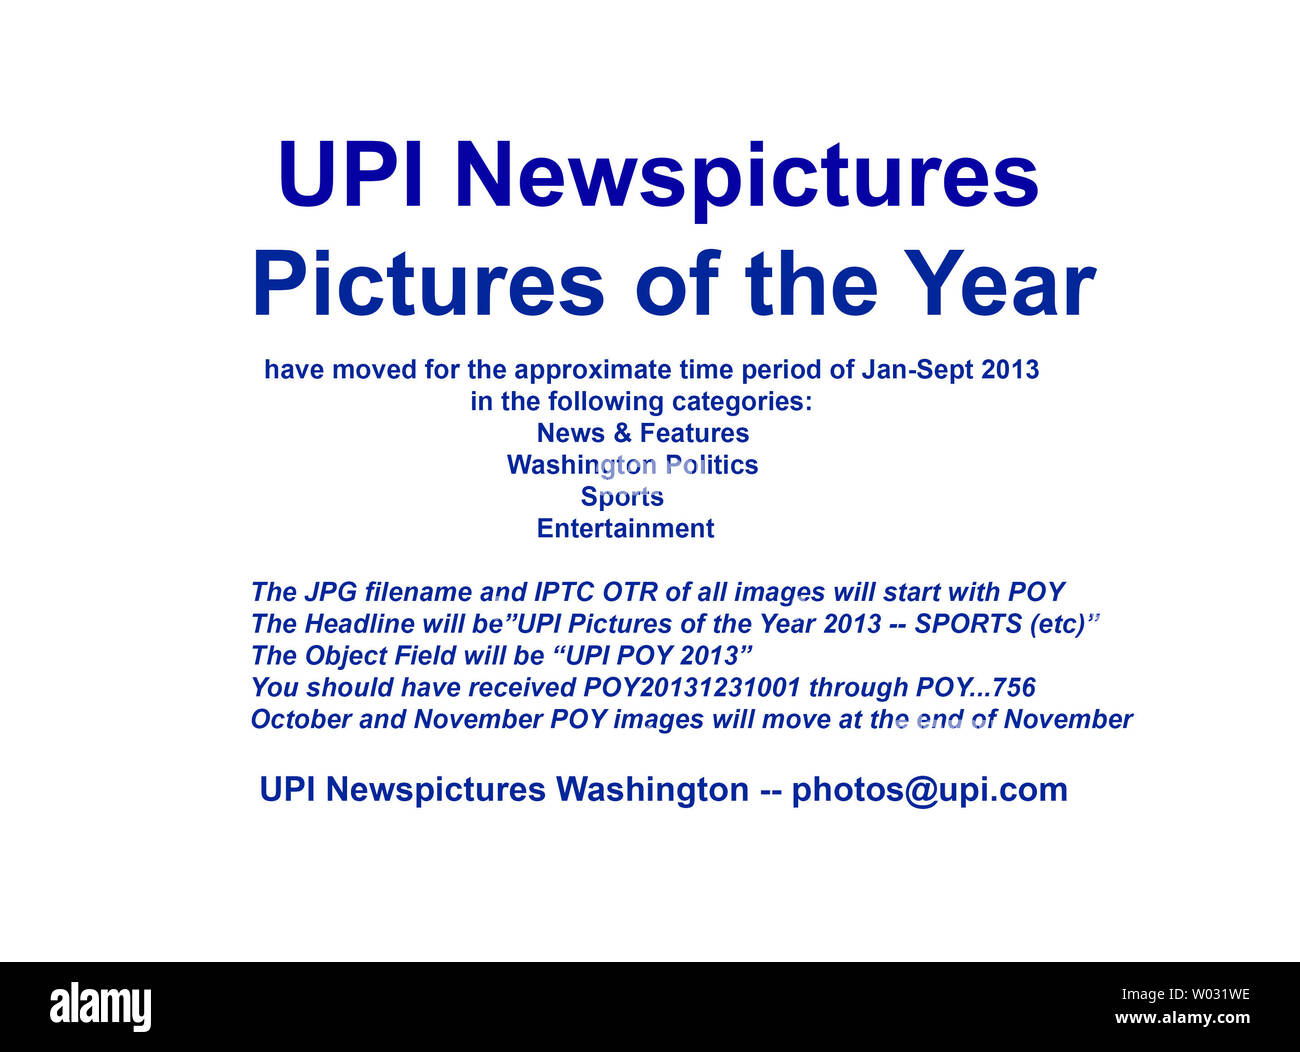 UPI Newspictures 2013 Pictures of the Year (POY) have moved for the approximate time period January through September 2013.  You should have received image transmission numbers POY20131231001 through POY...756  in the following categories:  News & Features, Washington Politics, Sports, and Entertainment.  October and November POY images will be transmitted at the end of November. The JPG filename and IPTC OTR of all images will start with POY.  The Object Field will start with 'UPI POY 2013'.  Thank you,  UPI Washington Stock Photo